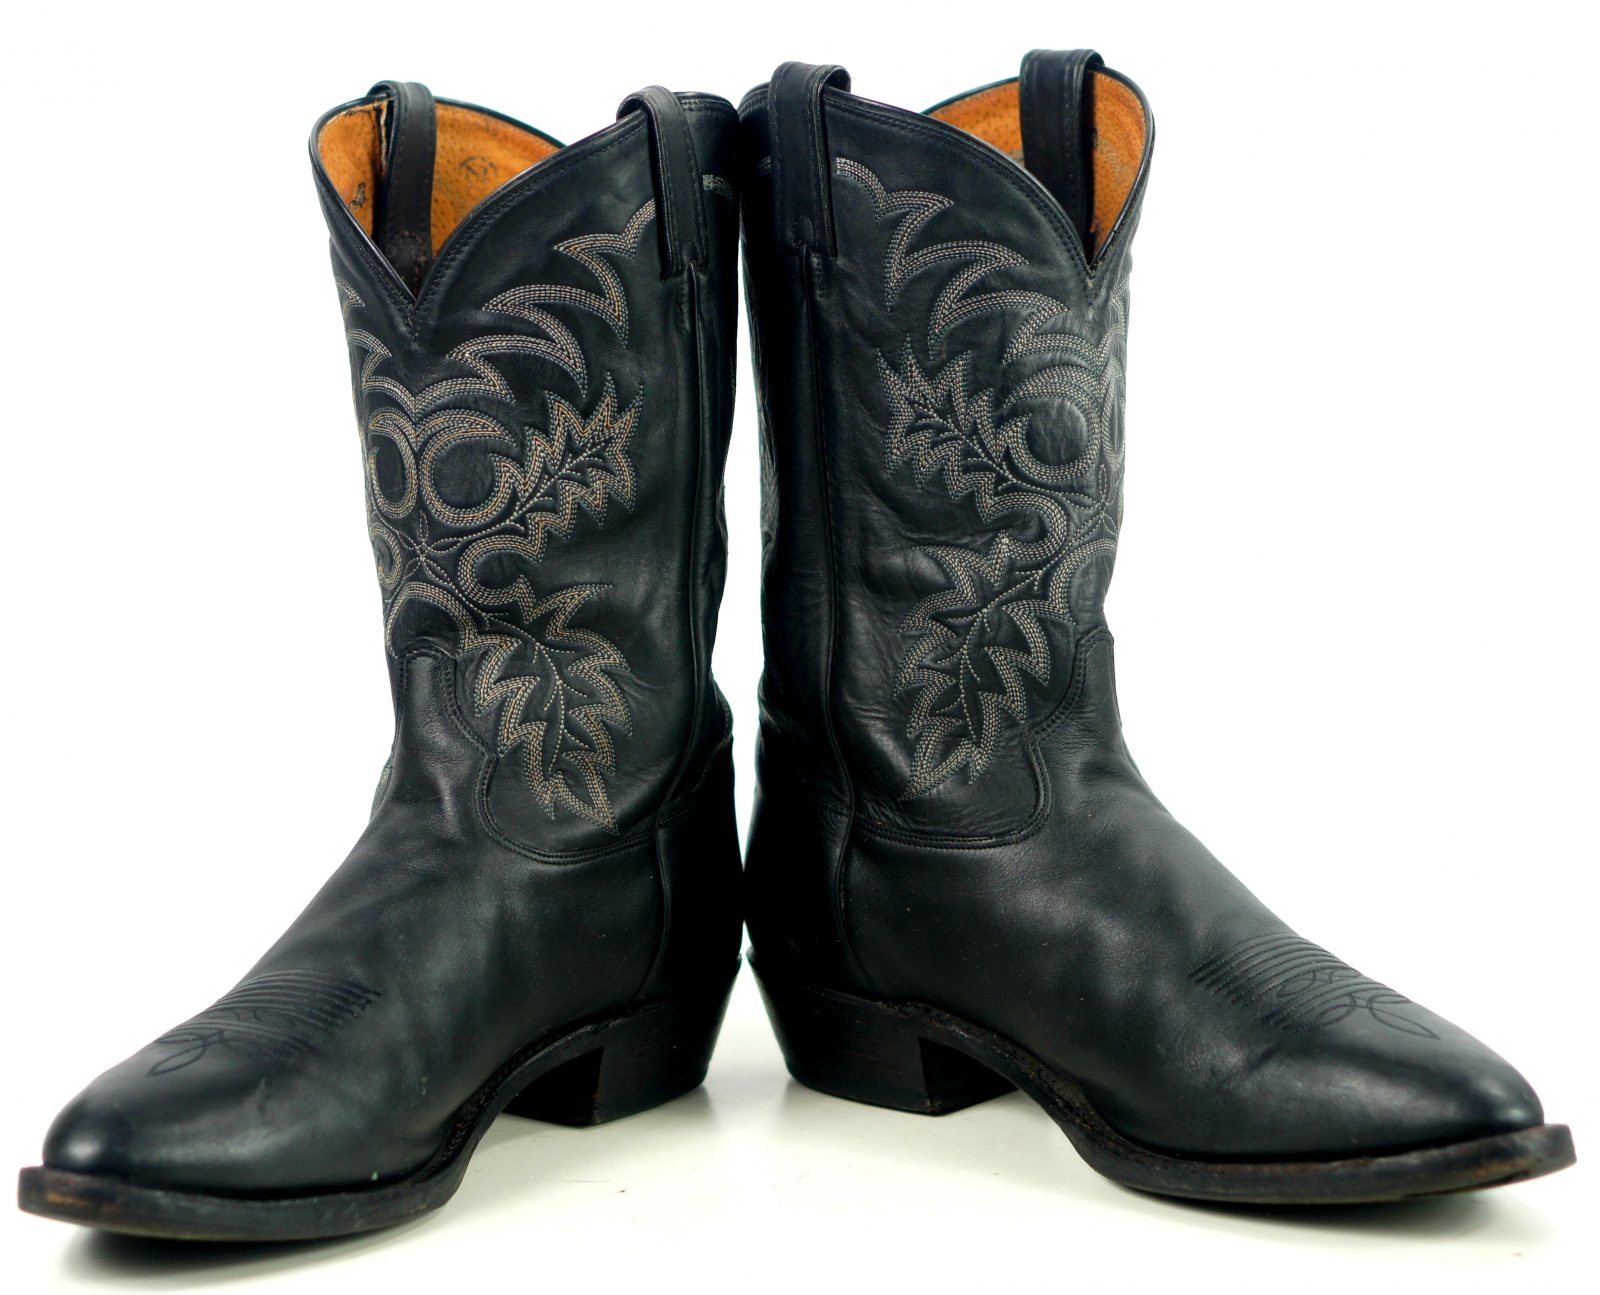 Tony Lama Black Leather Cowboy Western Boots USA Handcrafted Men